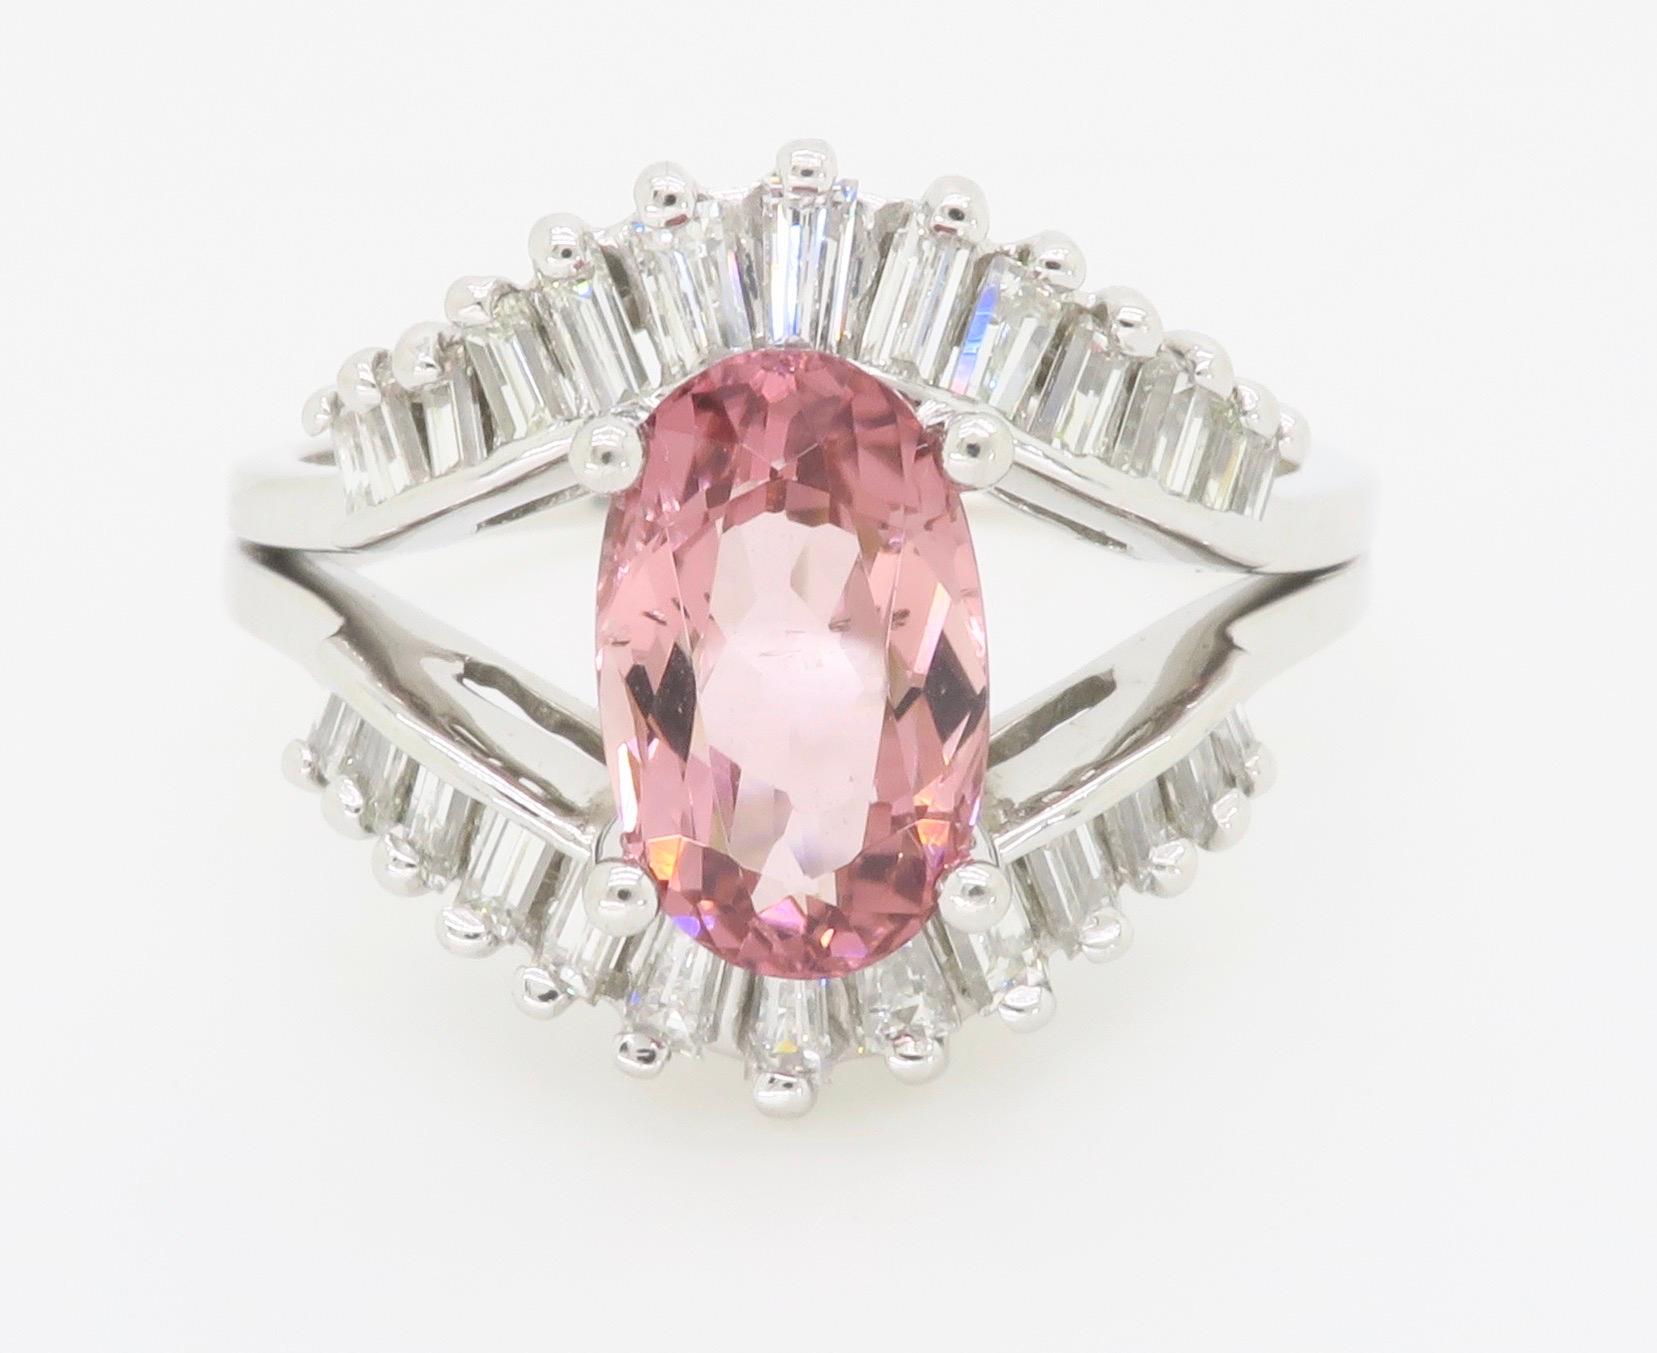 Pink Tourmaline & diamond bypass ring with a 2.03ct Oval Pink Tourmaline set between two rows of Diamonds. 

Gemstone: Pink Tourmaline & Diamond
Diamond Carat Weight: .50CTW
Diamond Cut: Baguette Diamonds
Pink Tourmaline Carat Weight: 2.03CTW
Metal: